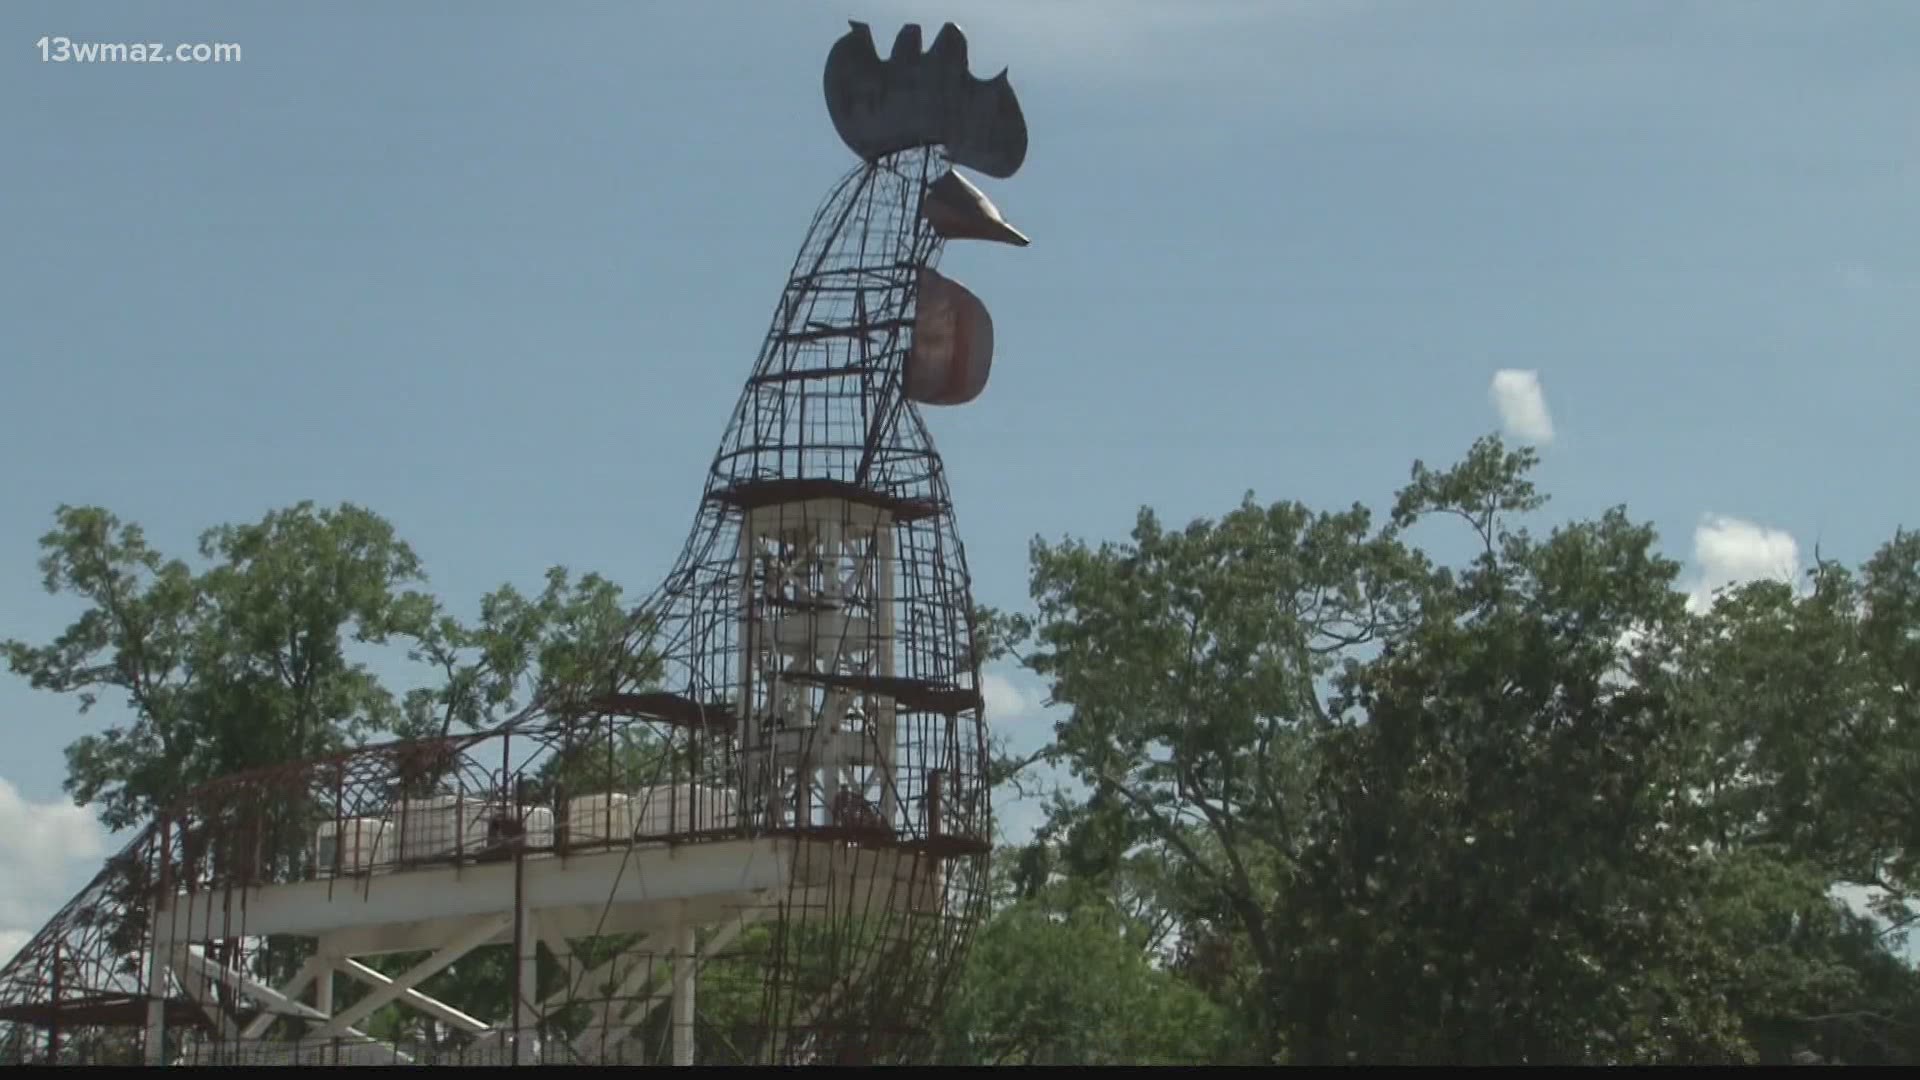 In Fitzgerald, Georgia, it's not unusual to see and hear wild chickens roaming the streets, so it makes sense they would build a giant statue to celebrate the oddity